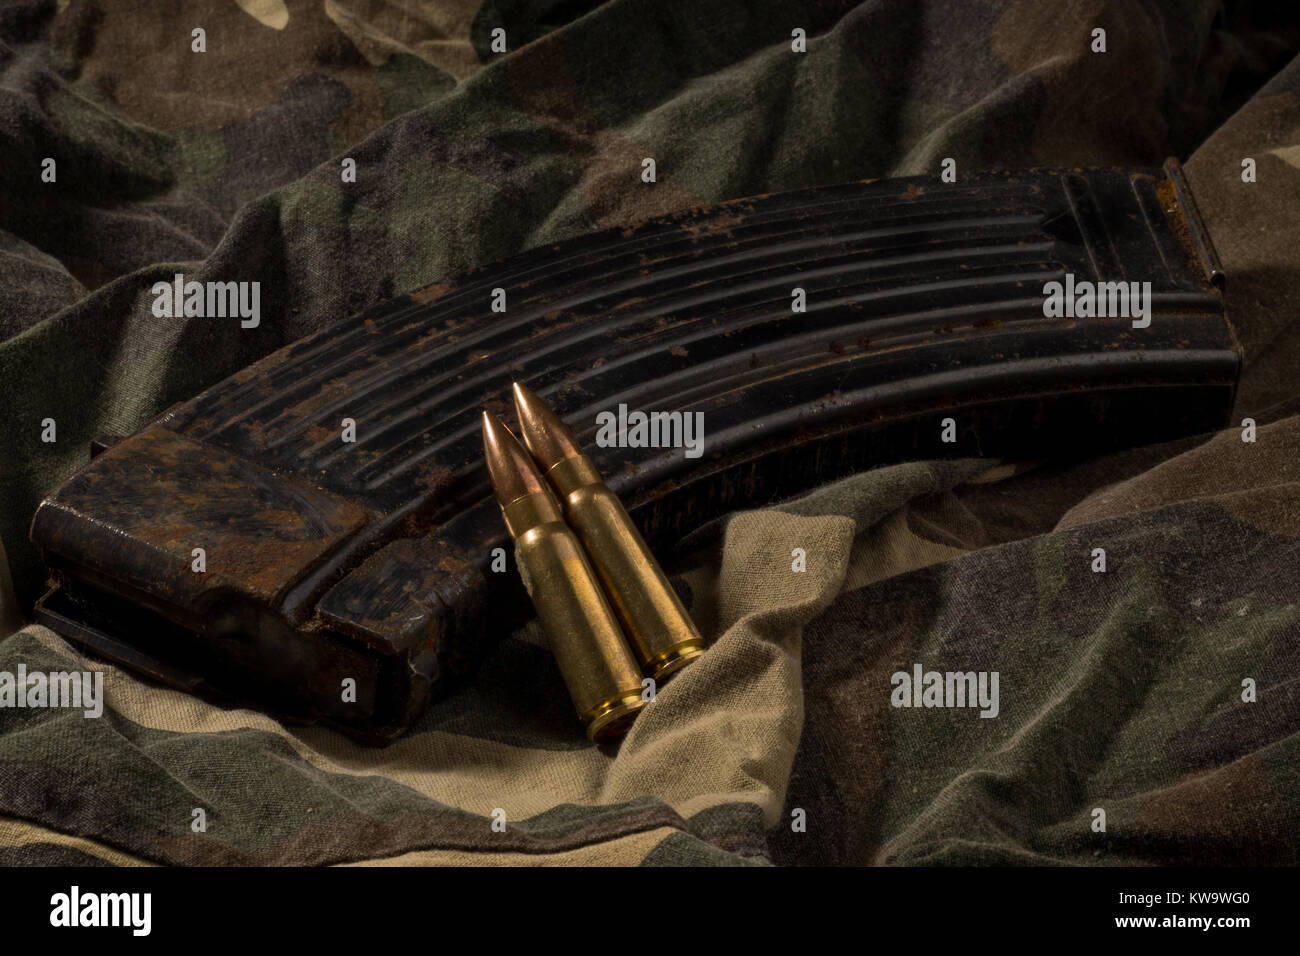 Rusty AK-47 magazine and bullets on camouflage textile background Stock Photo